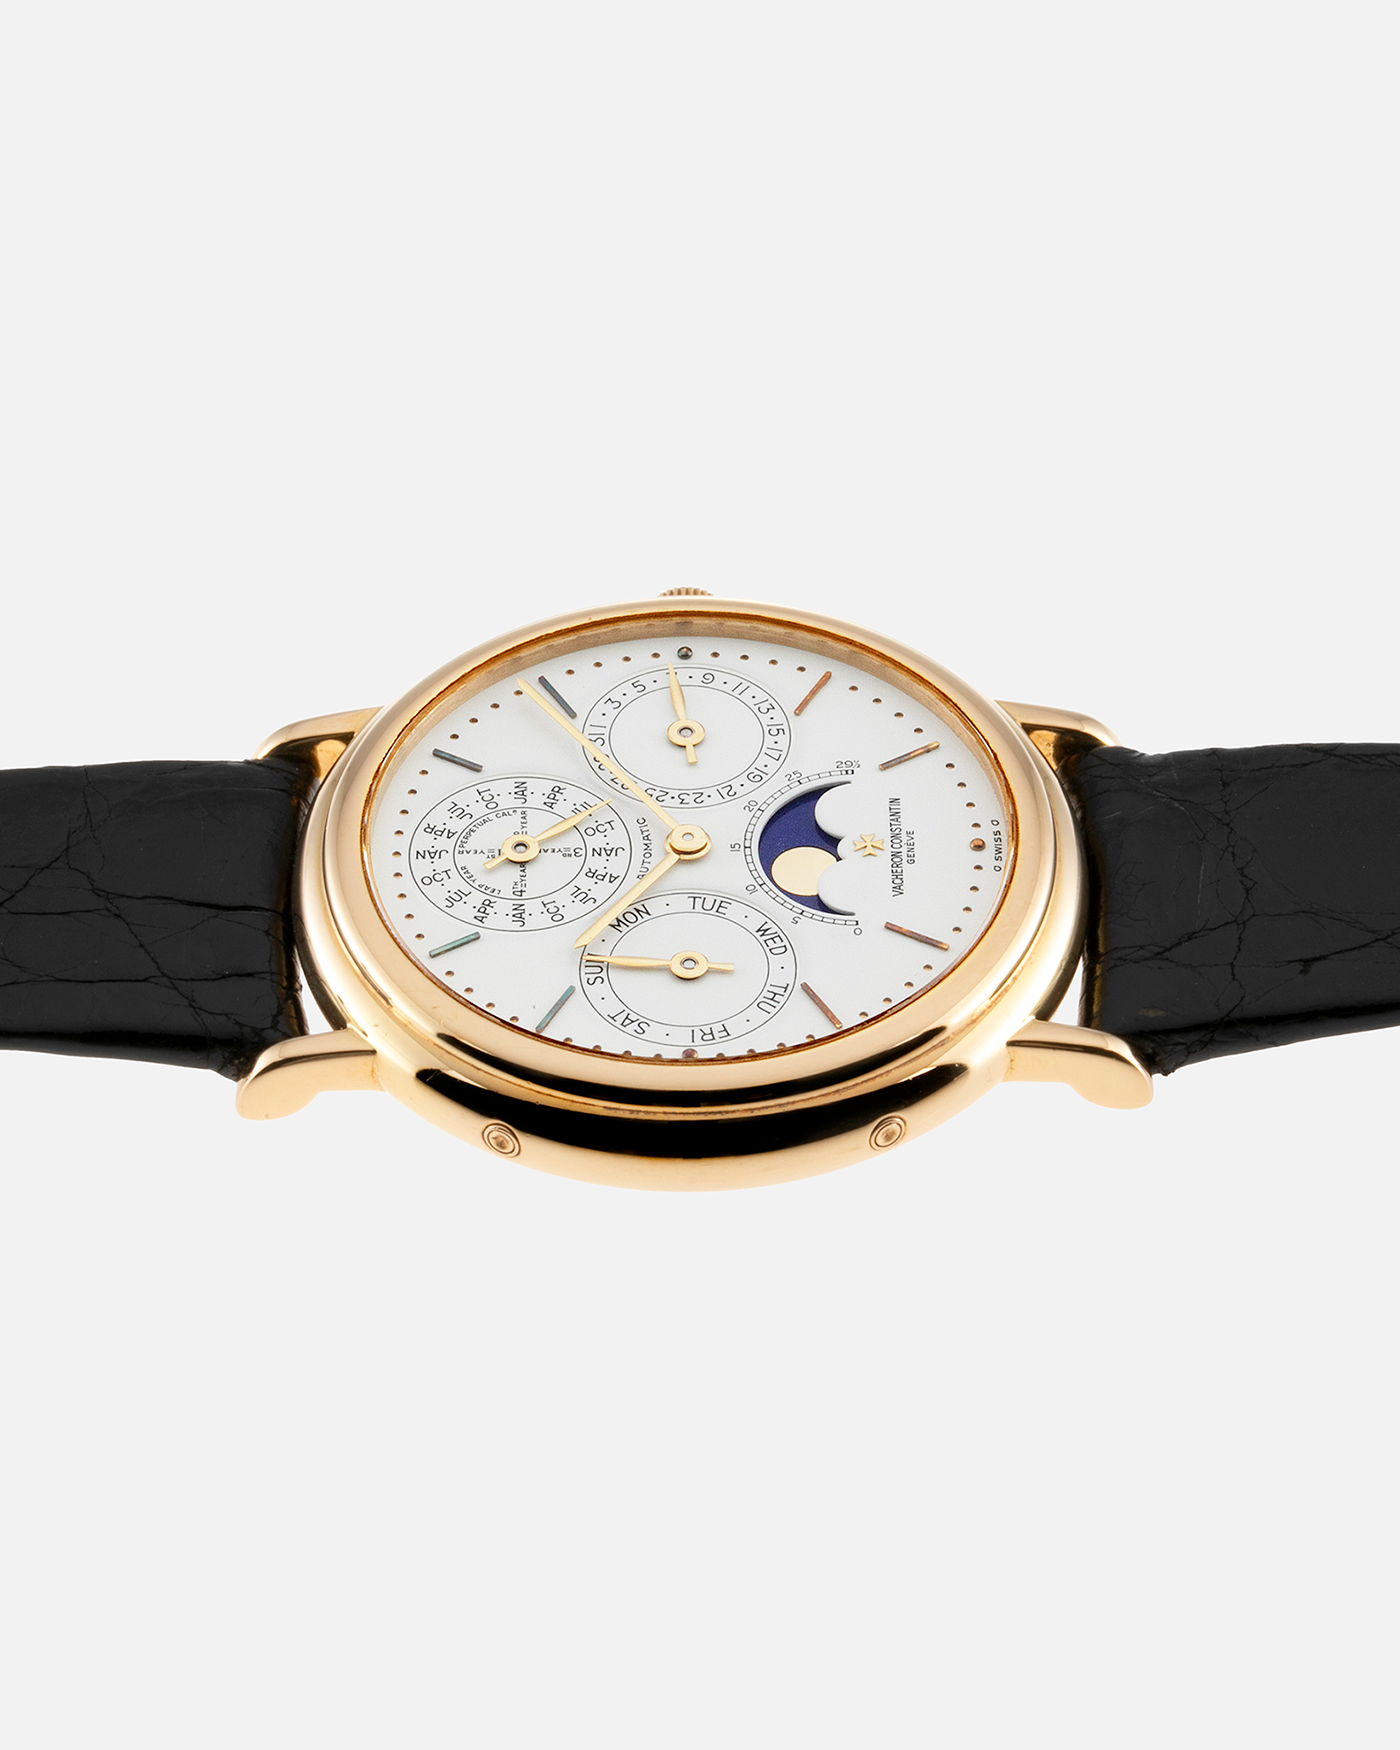 Brand: Vacheron Constantin Year: 1990’s Model: Perpetual Calendar Reference Number: 43031 Material: 18k Yellow Gold Movement: Vacheron Constantin Cal. 1120/2 Case Diameter: 36mm Strap: Black Vacheron Constantin Alligator Strap with 18k Yellow Gold Tang Buckle